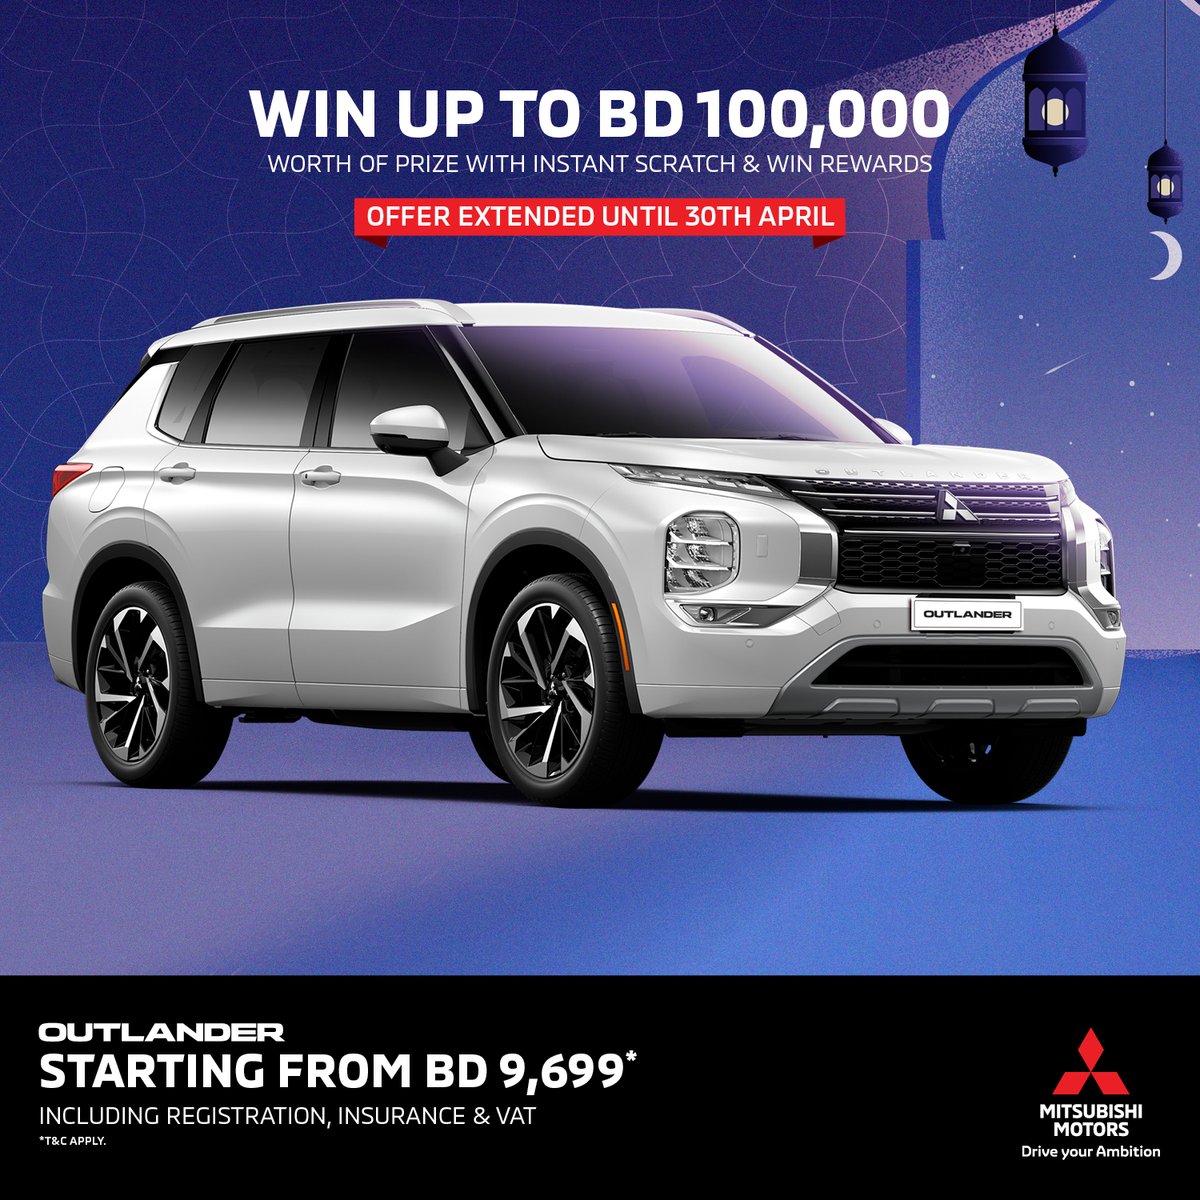 Explore thrilling performance with Mitsubishi's offers. Stand a chance to win prizes worth up to BD 100,000 with an instant scratch card.
*Terms & Conditions Apply.

#Rewards #ZayaniMotors #MitsubishiMotors #Bahrain #البحرين